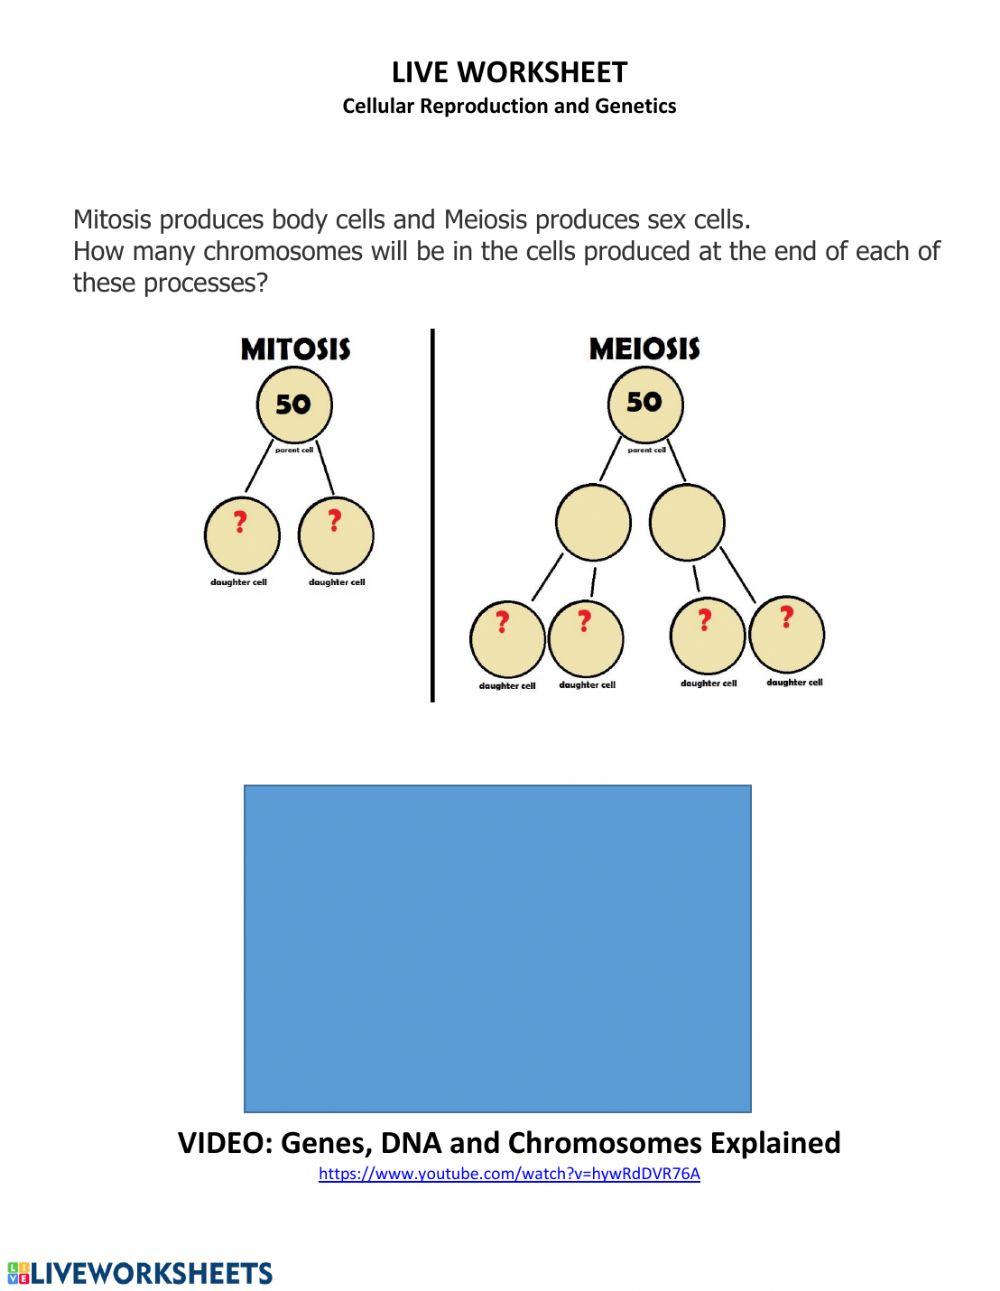 LIVE WORKSHEET: Cellular Reproduction and Genetics